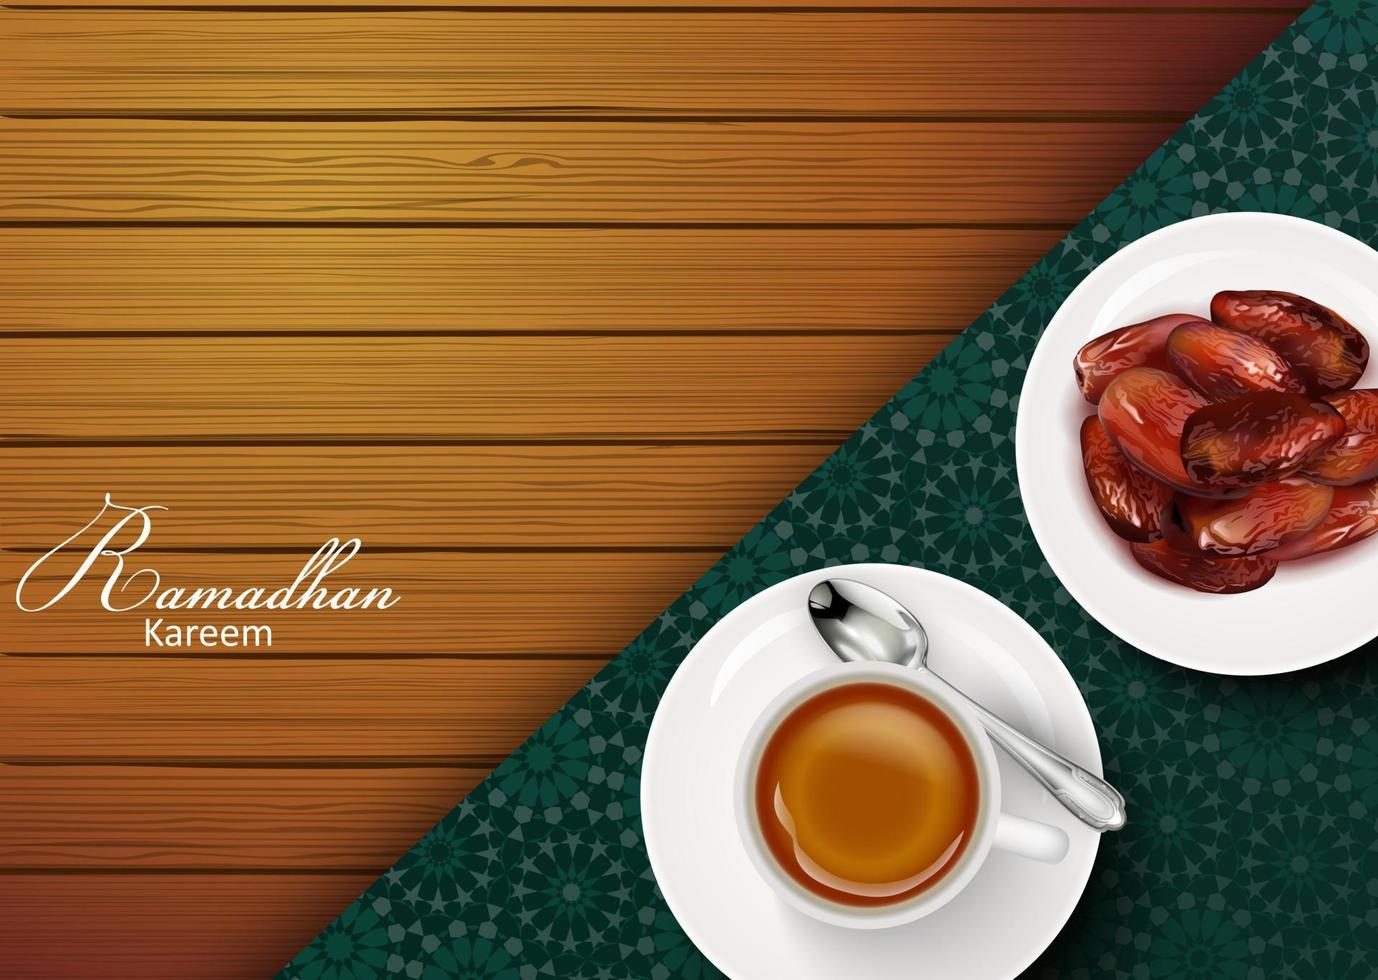 Iftar party invitation greeting ramadan kareem with traditional tea cup and a bowl of dates vector